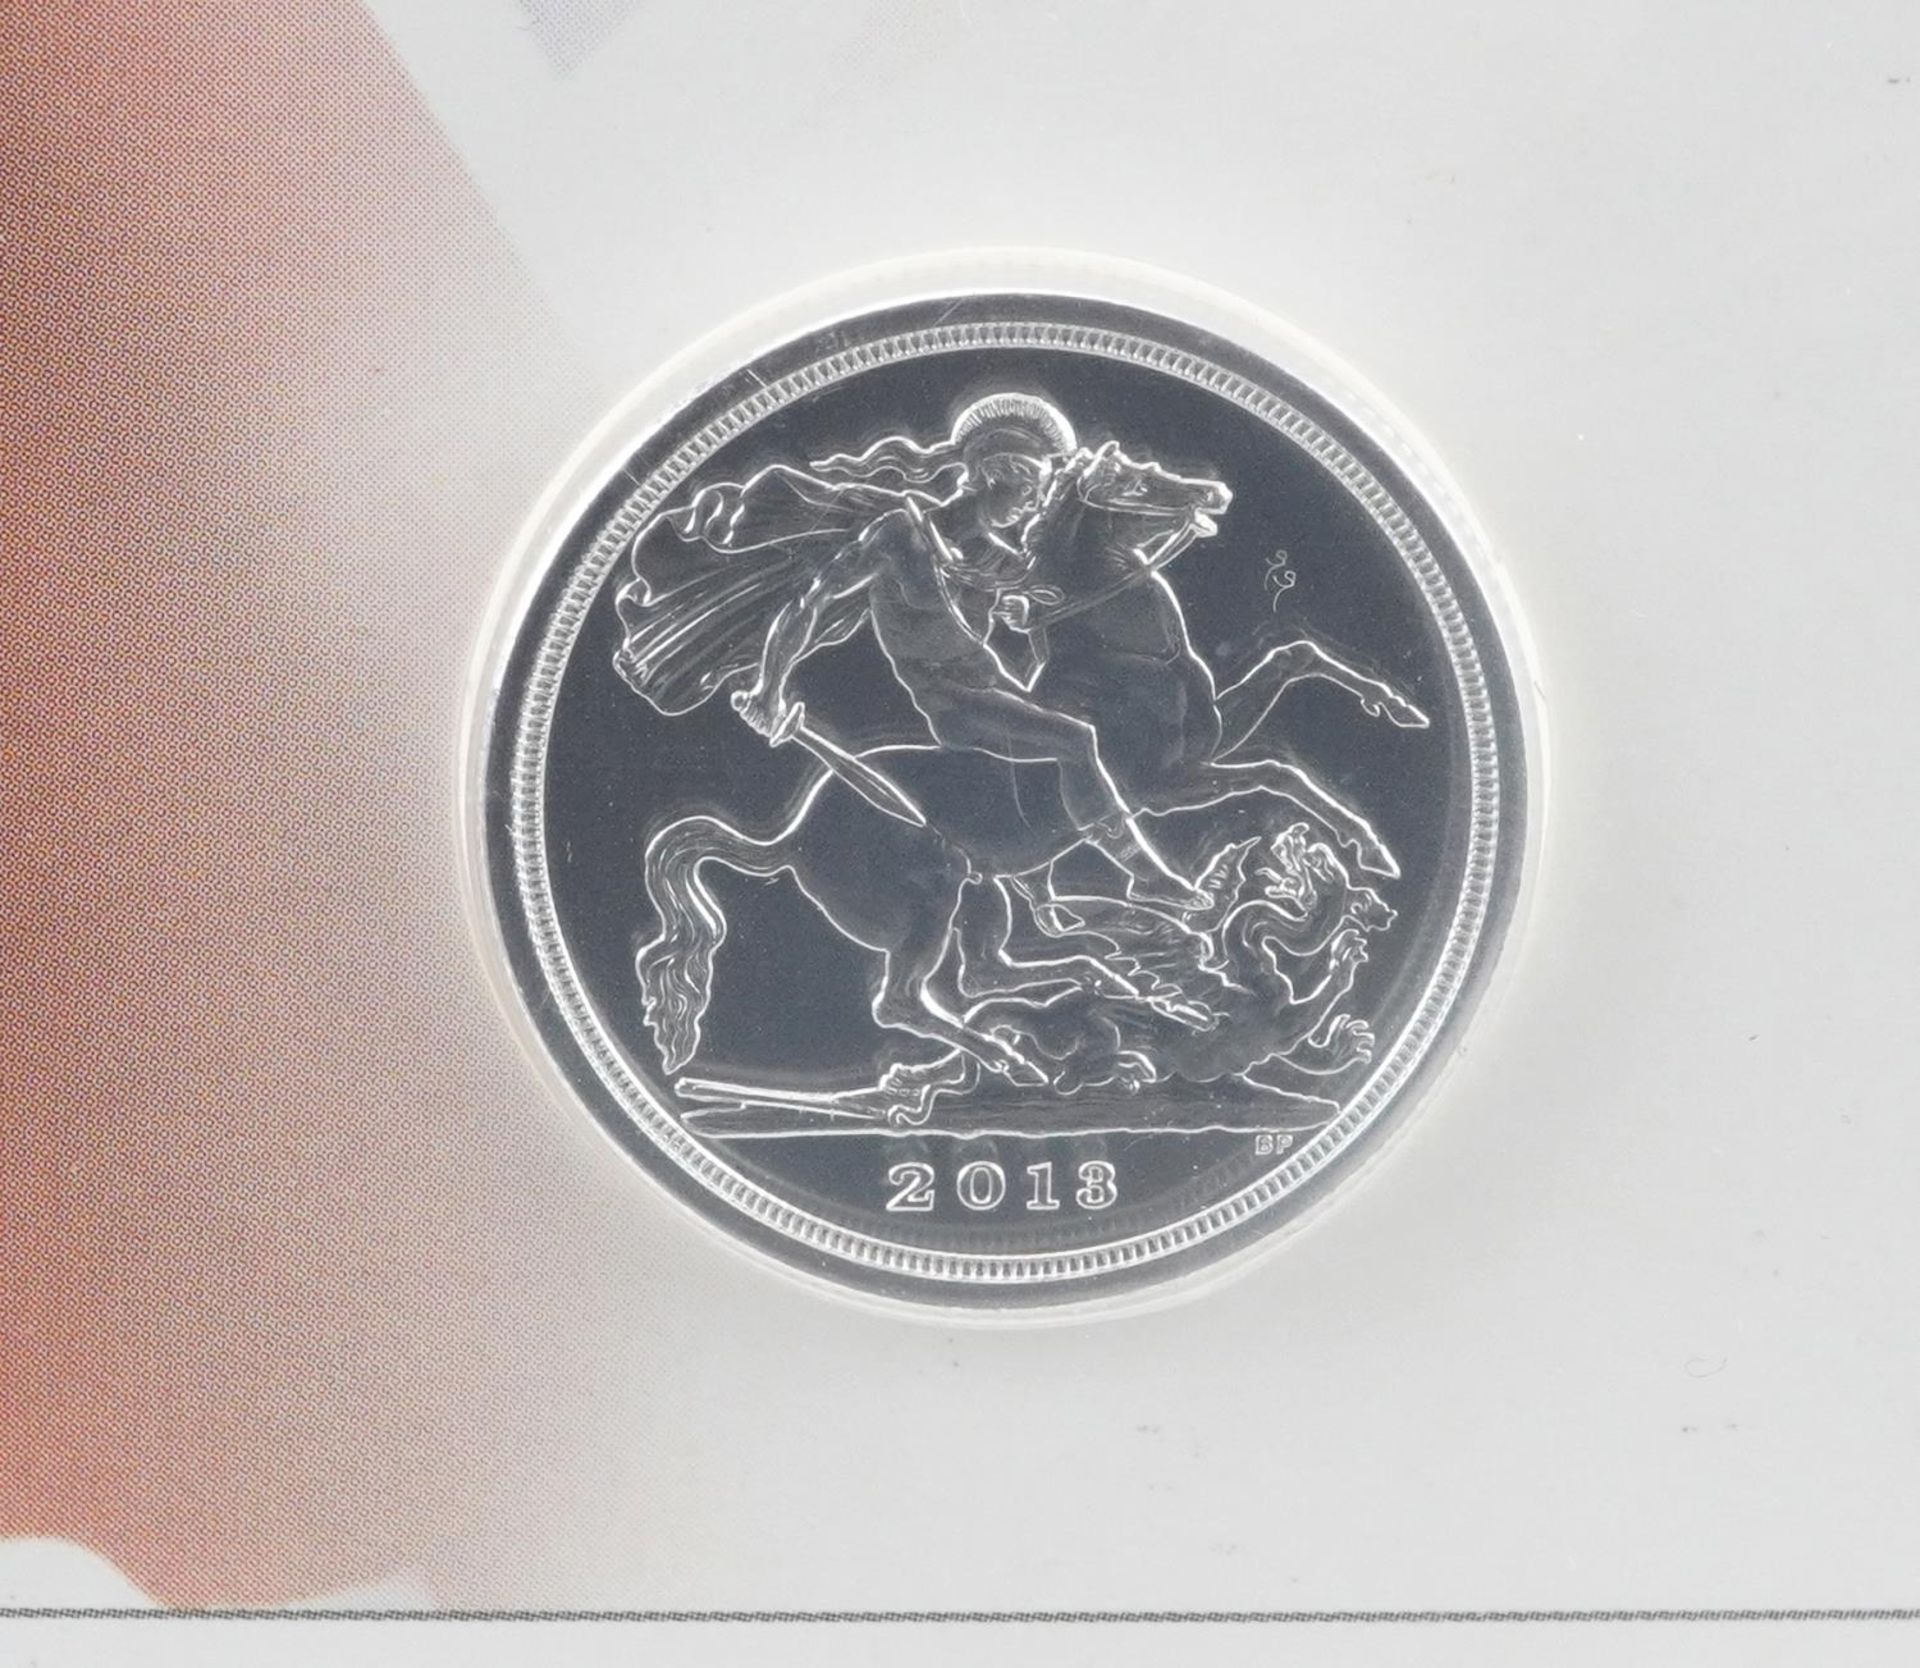 Three Elizabeth II 2013 George and the Dragon twenty pound fine silver coins by The Royal Mint - Image 2 of 4